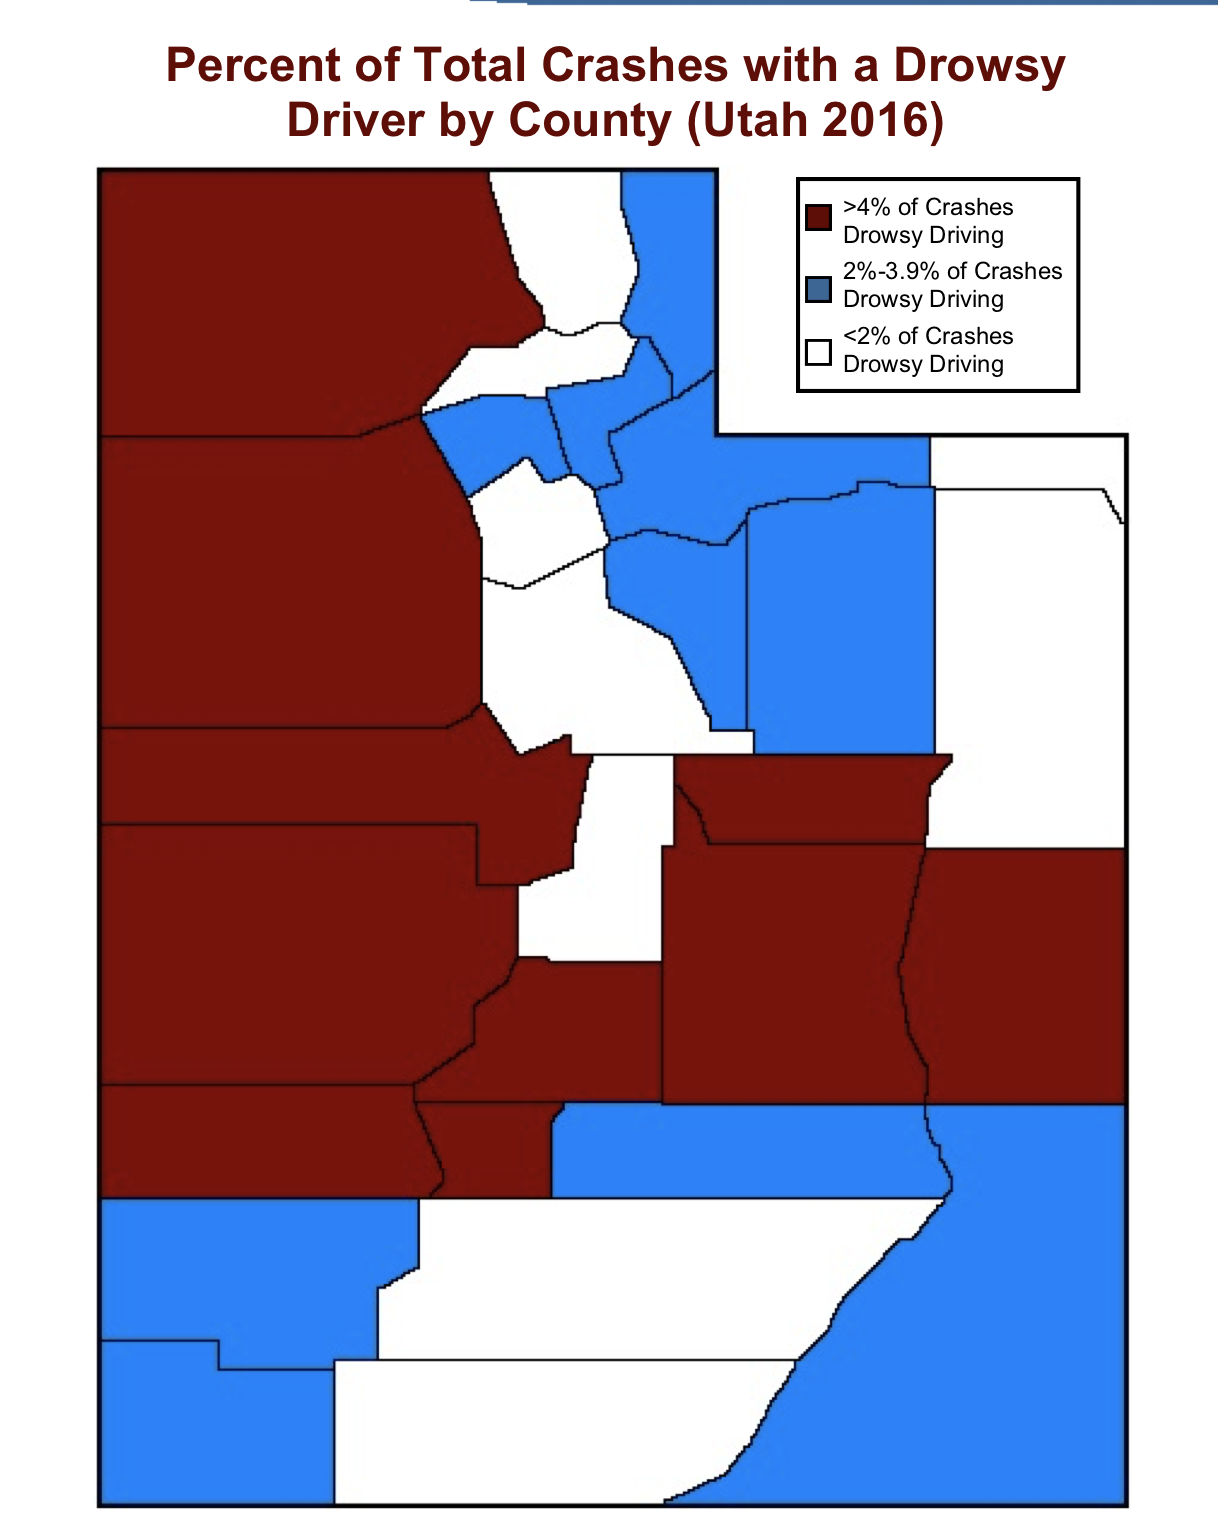 Map of Utah shows the % total crashes with a drowsy driver by county in Utah in 2016. Juab and Emery Counties had the highest percent of crashes involving drowsy drivers.  Rural crashes were 2.3 times more likely to involve a drowsy driver than urban crashes.